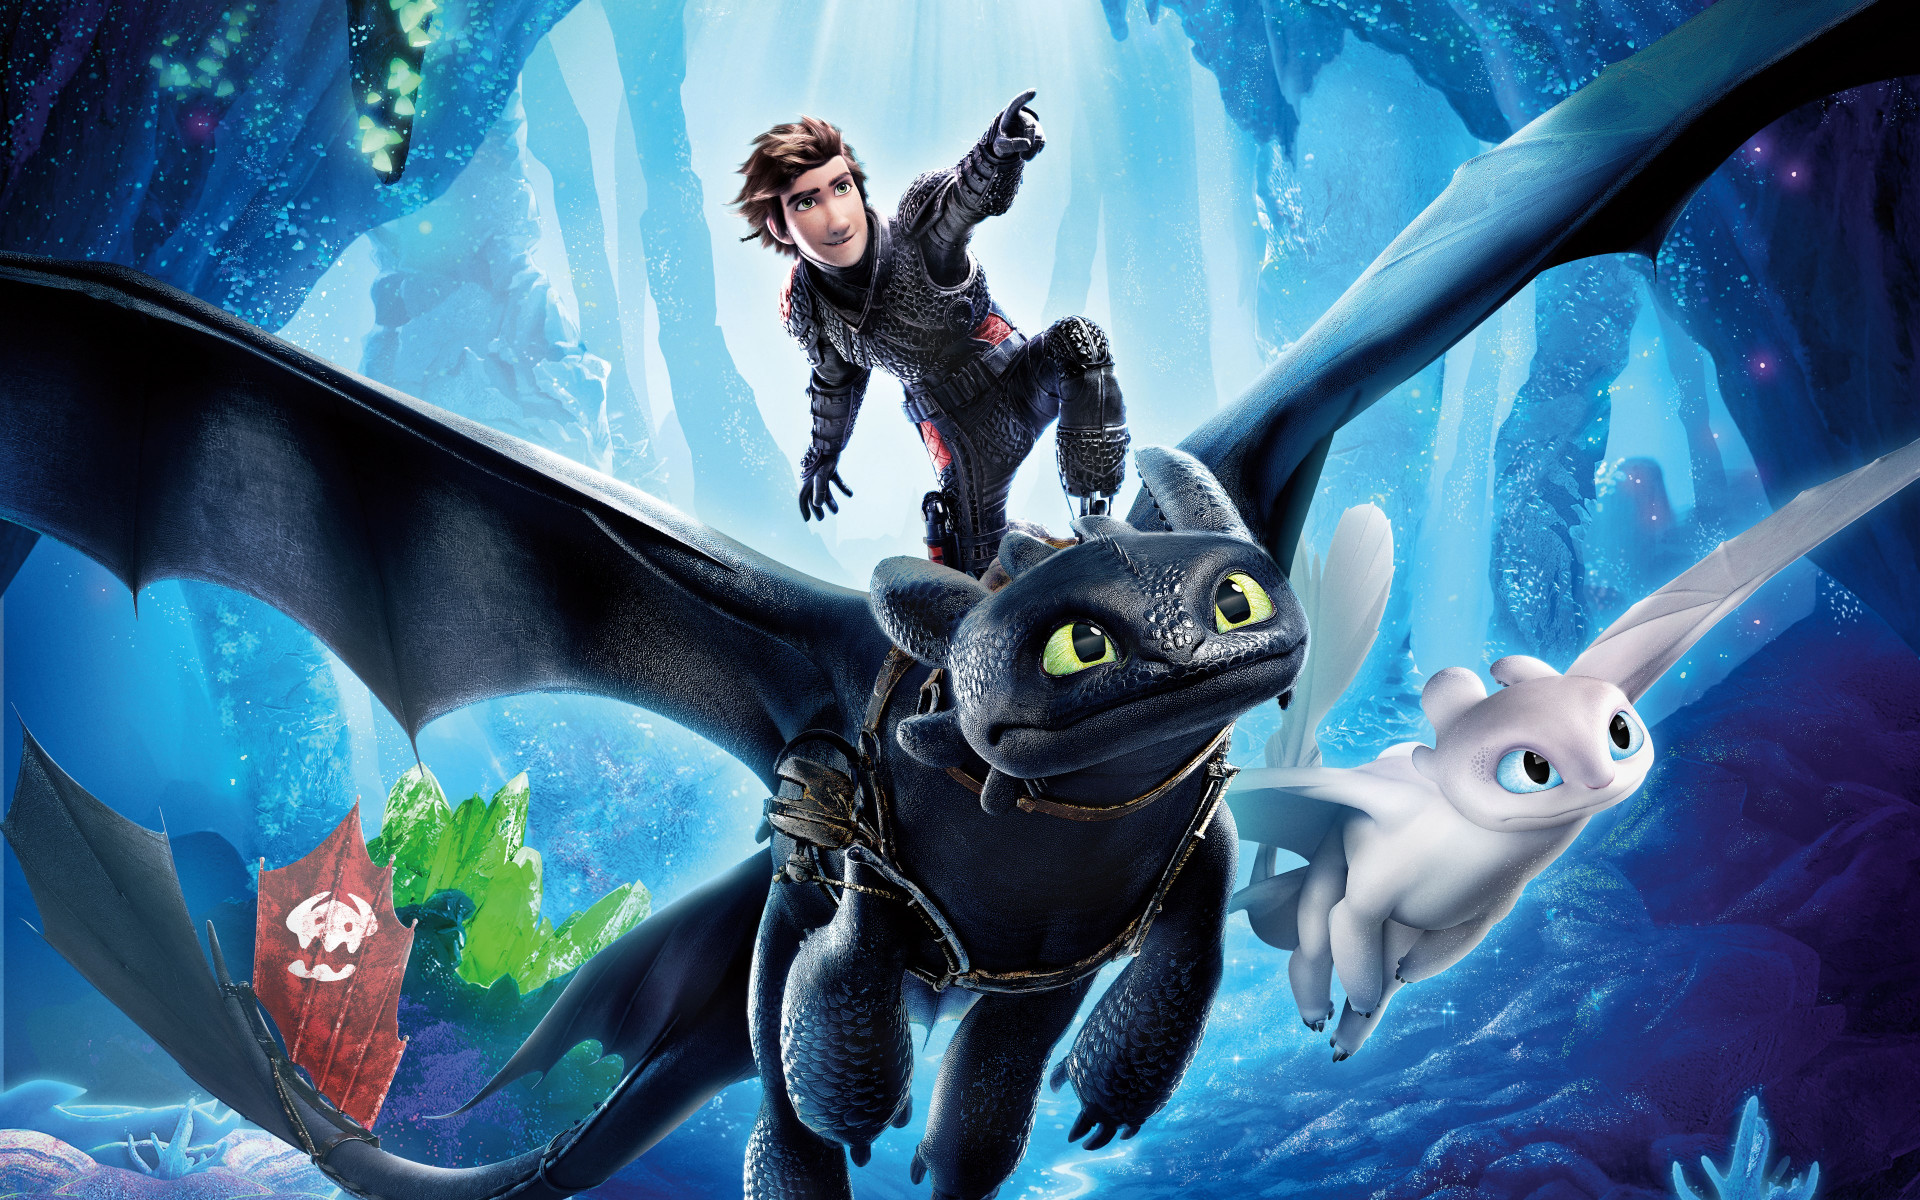 How to Train Your Dragon 2019 wallpaper 1920x1200